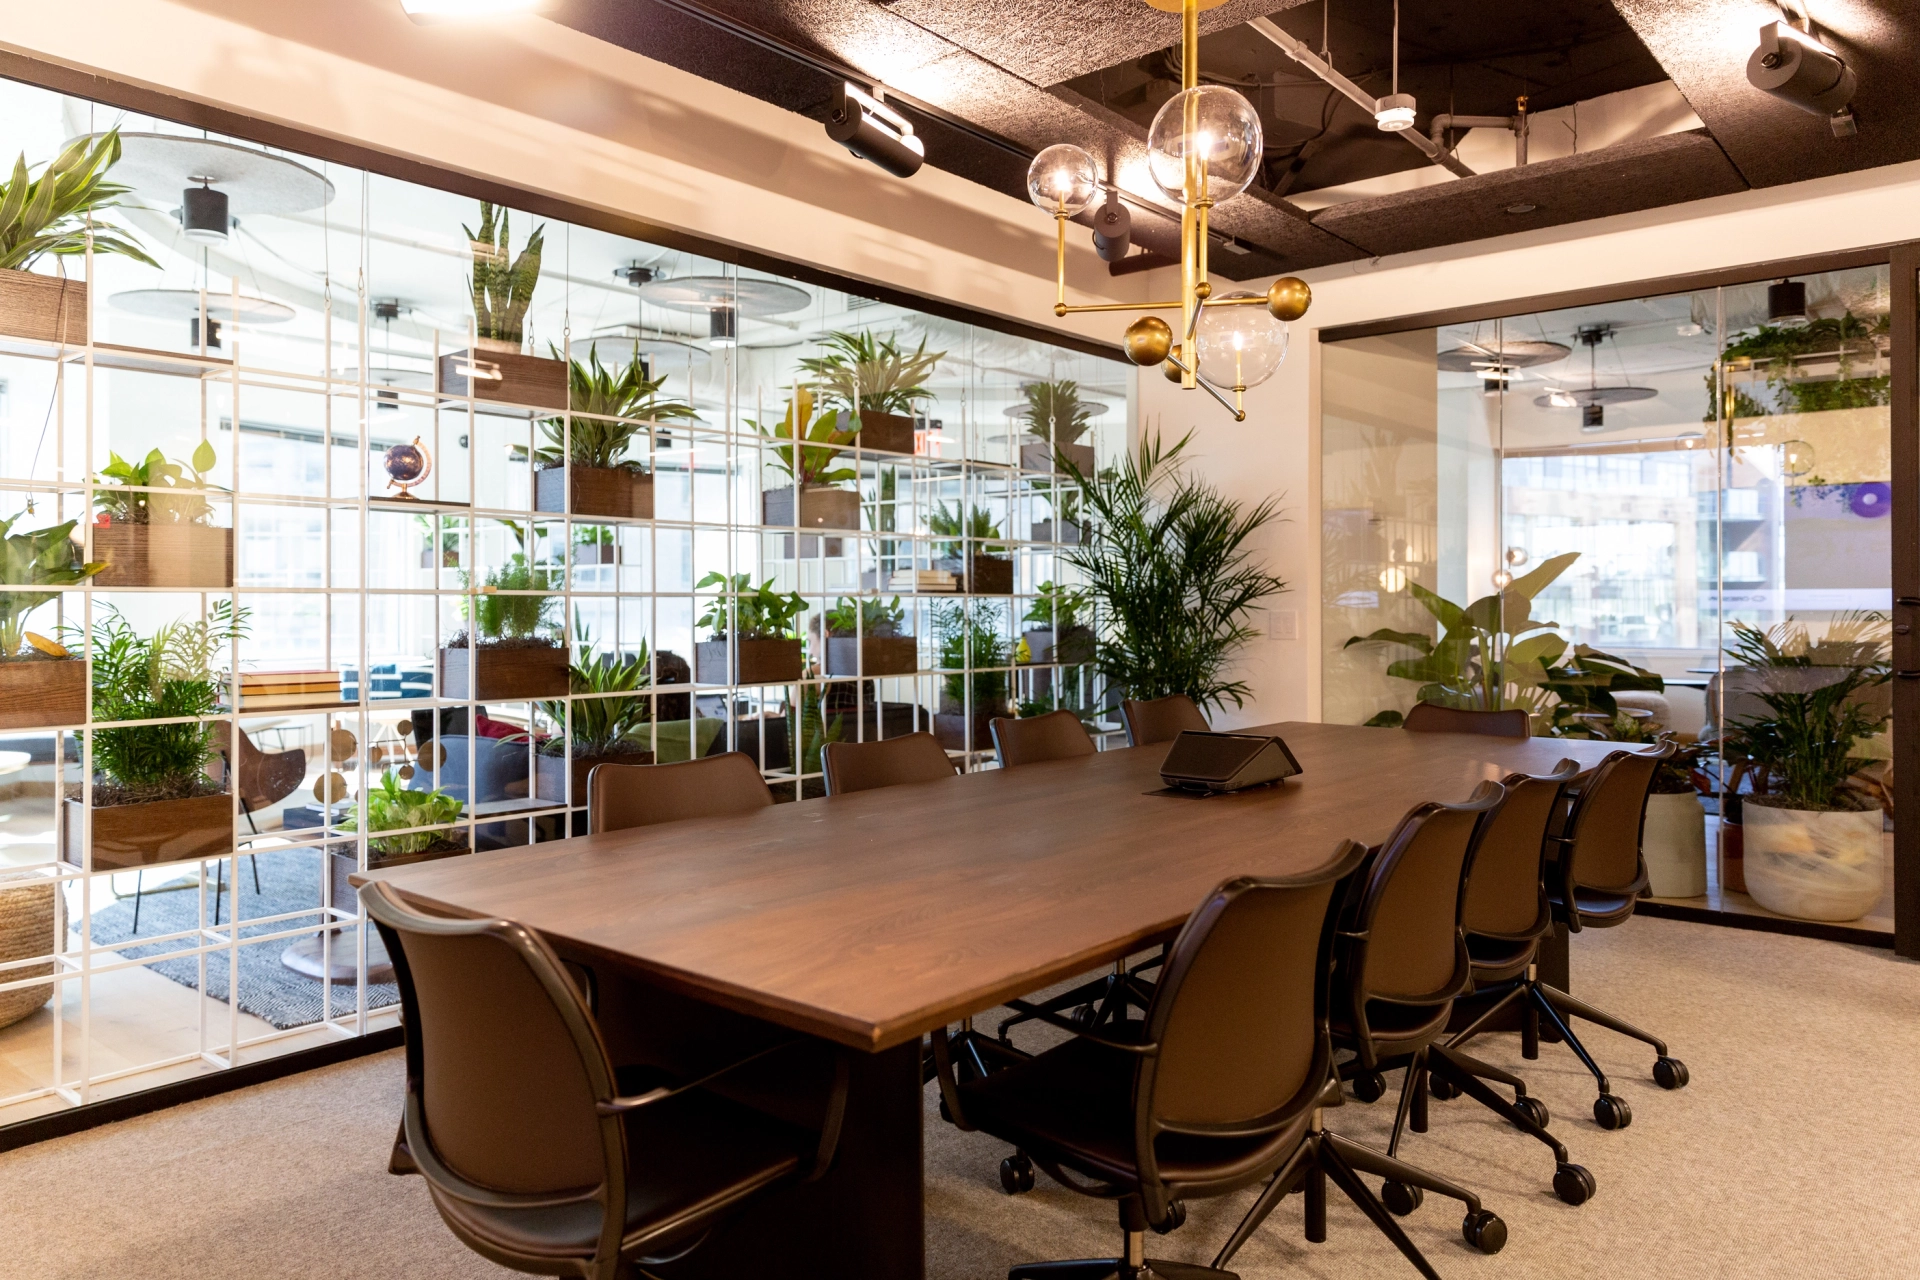 a coworking space with a glass-walled conference room filled with plants.